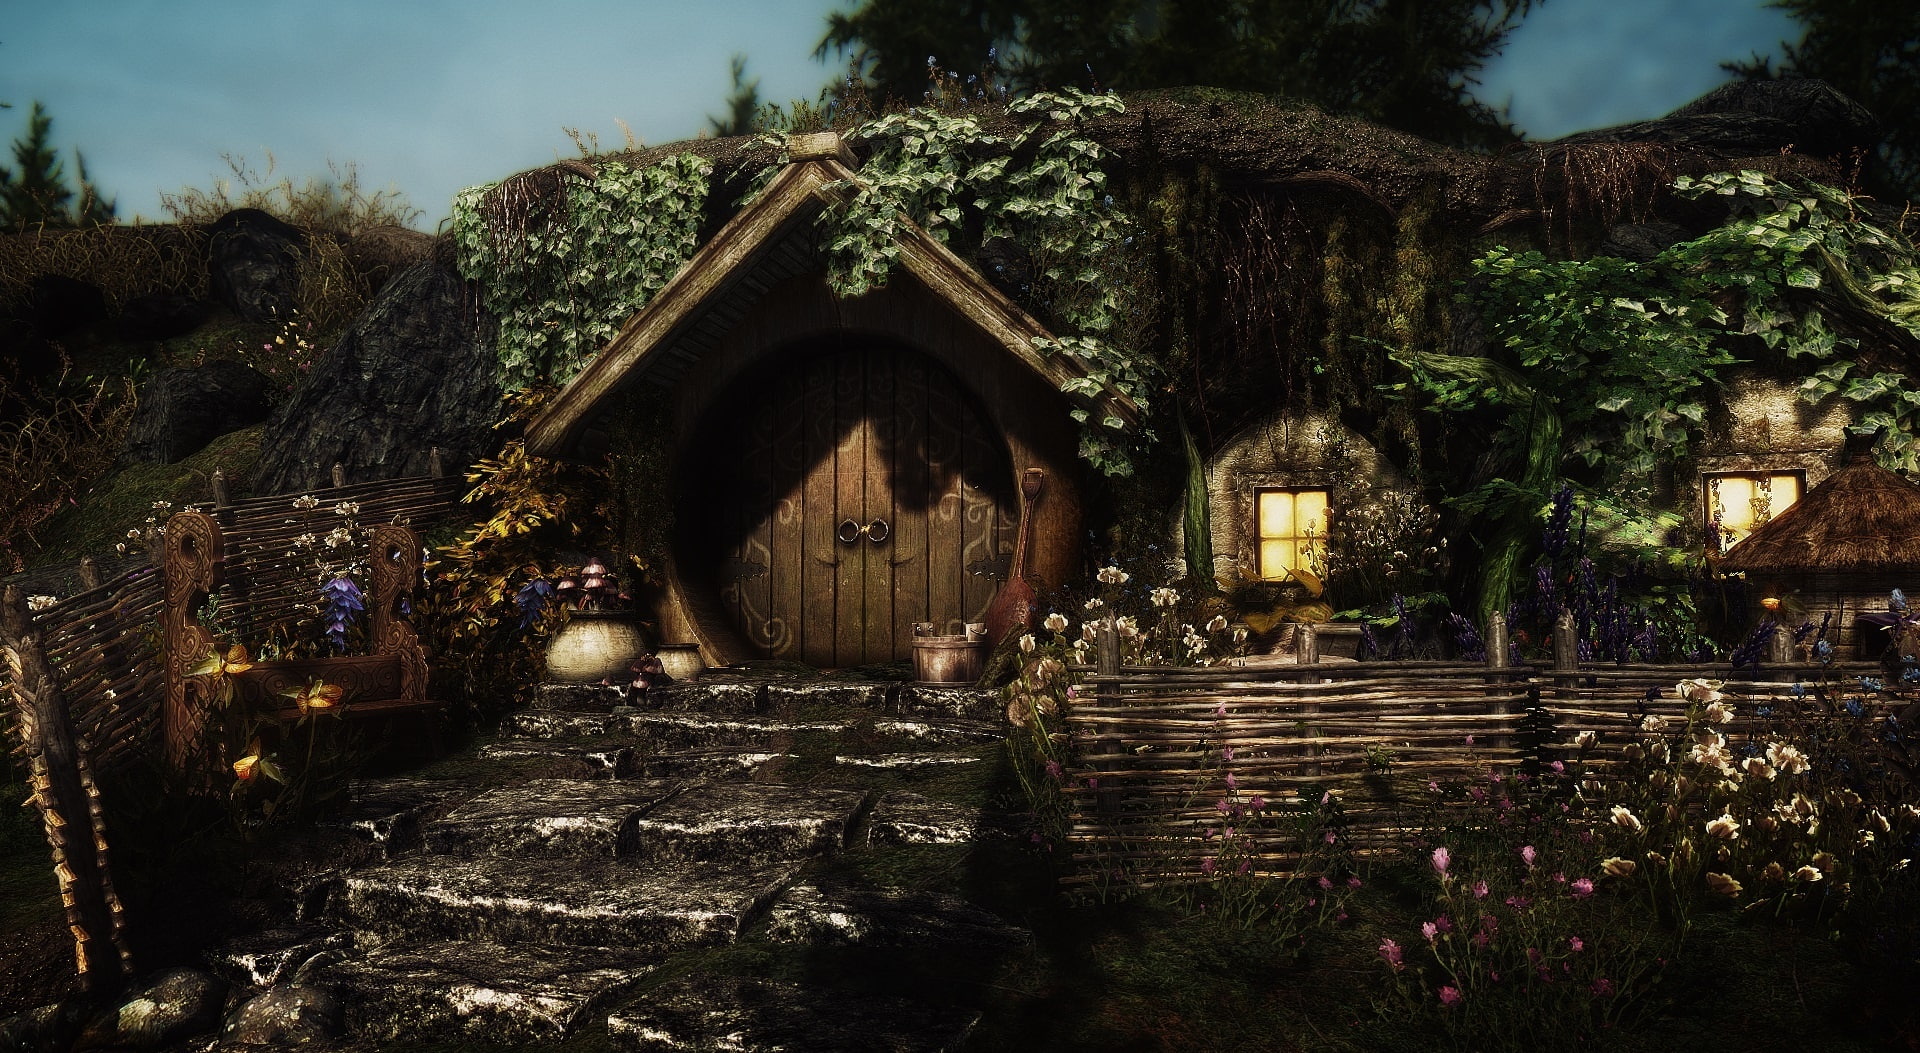 Hobbit Hole, The Lord of the Rings Hobbit house, Movies, The Hobbit